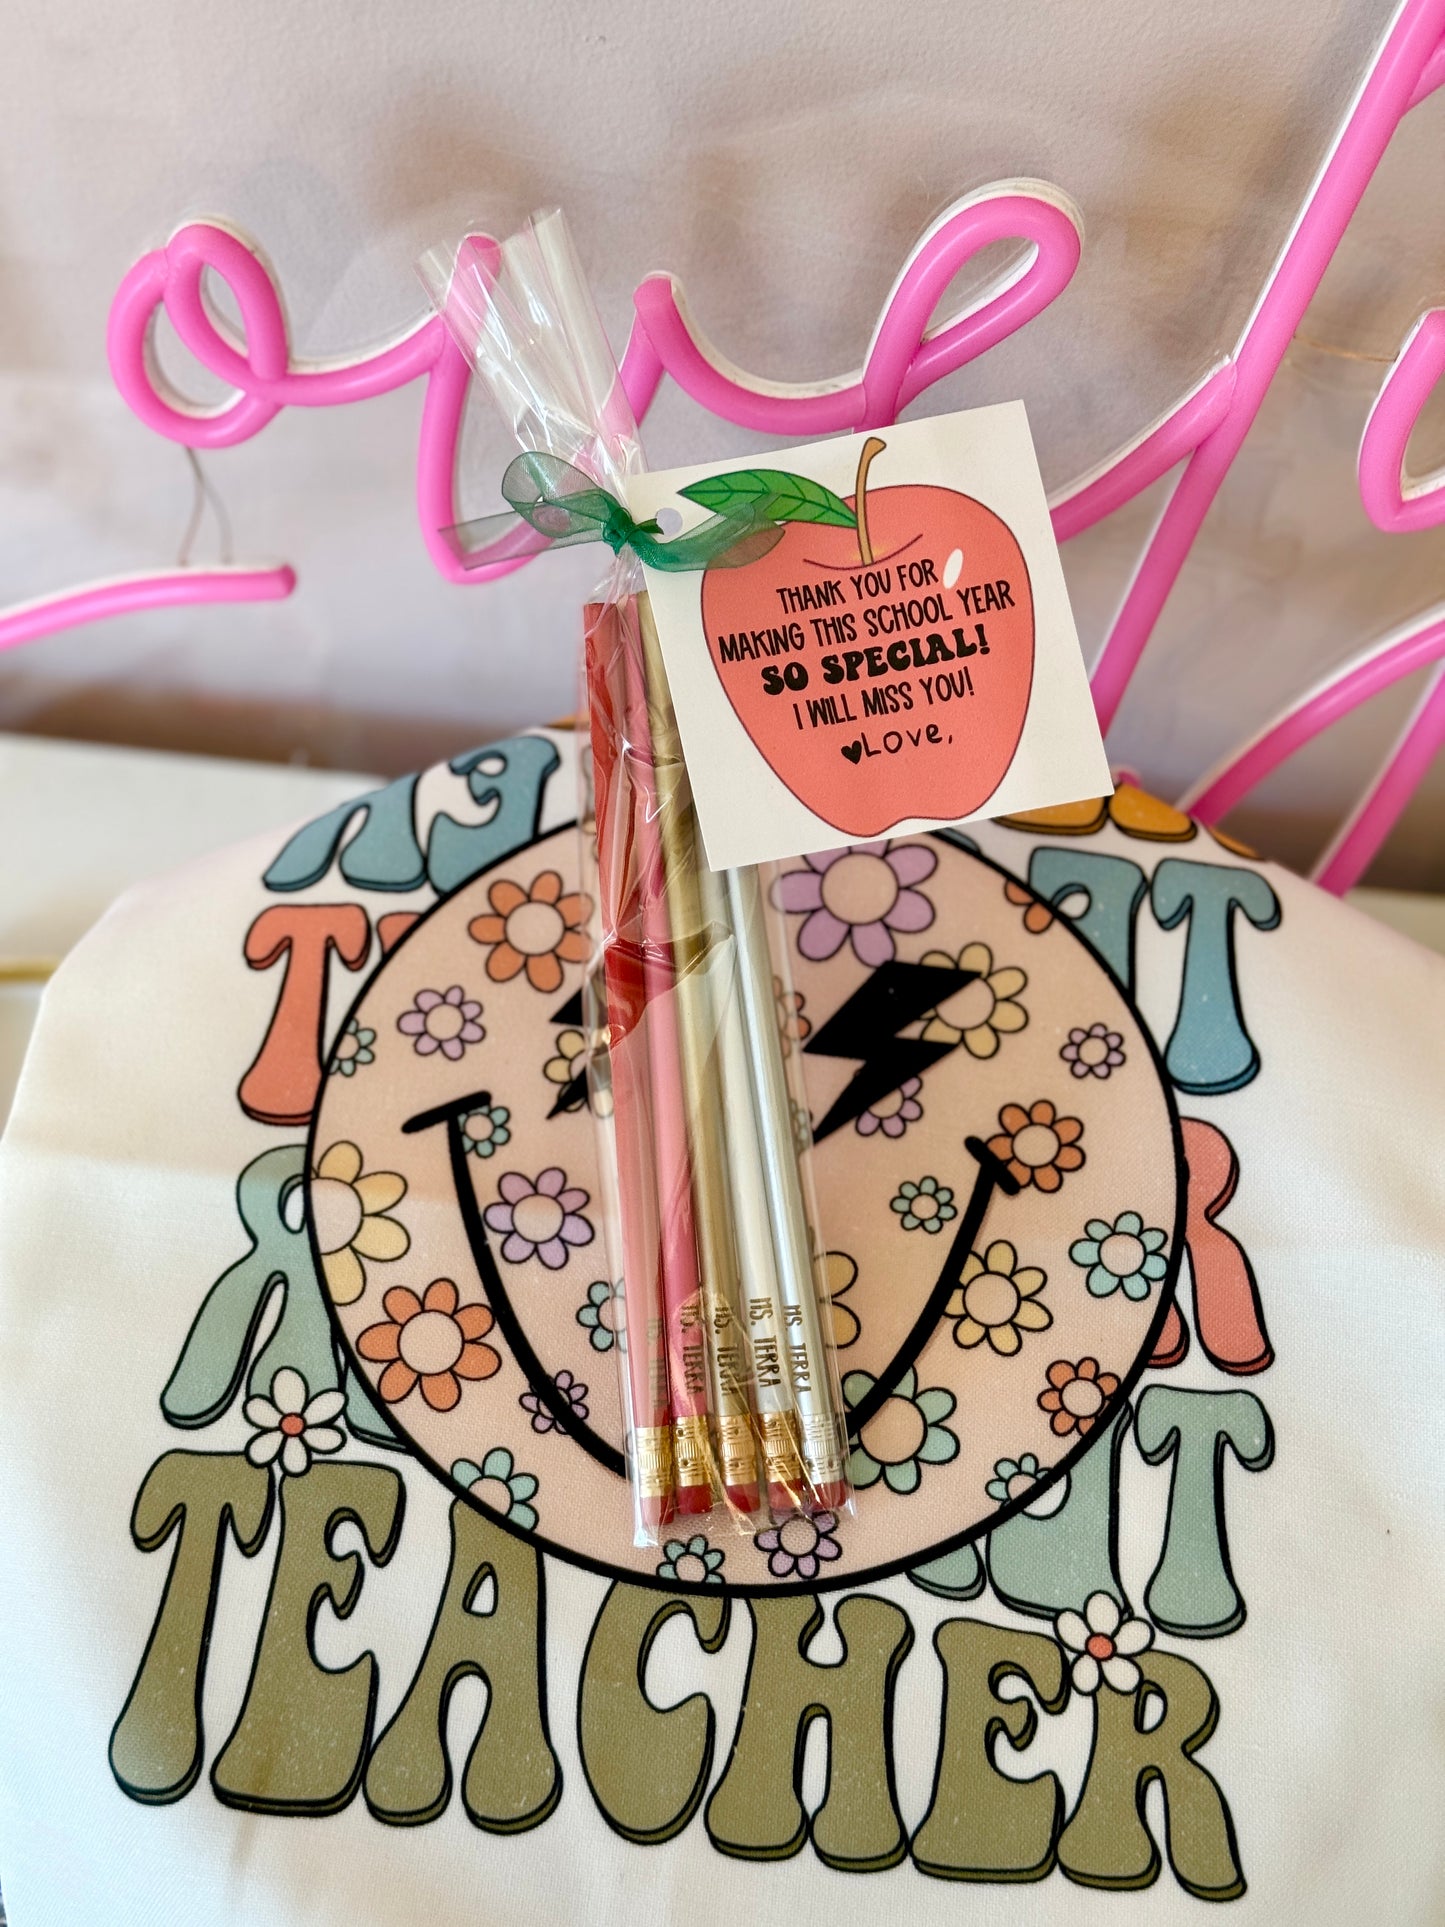 Engraved Pencils, End of Year Teacher Gift! Teacher Appreciation gift, personalized card with clear gift wrap! School staff thank you gift!